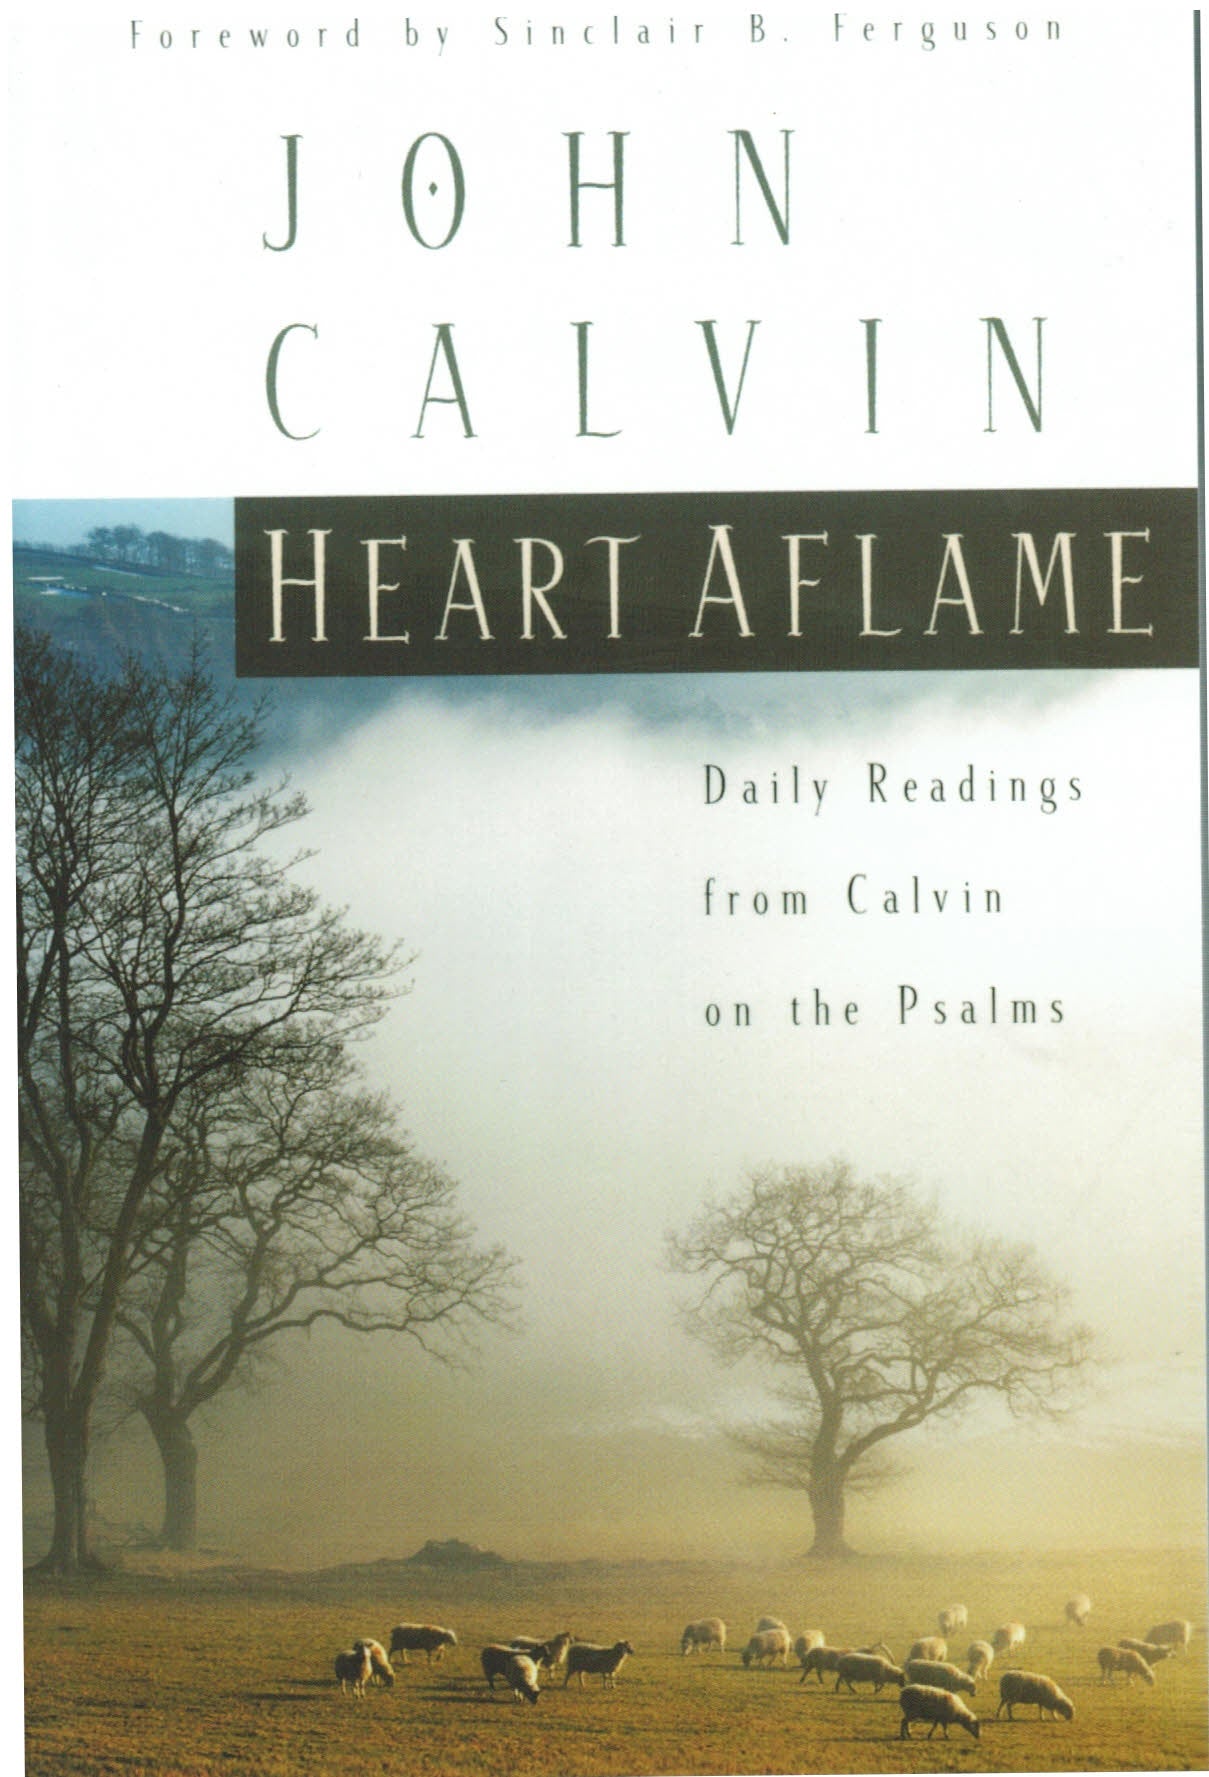 Heart Aflame: Daily Readings from Calvin on the Psalms